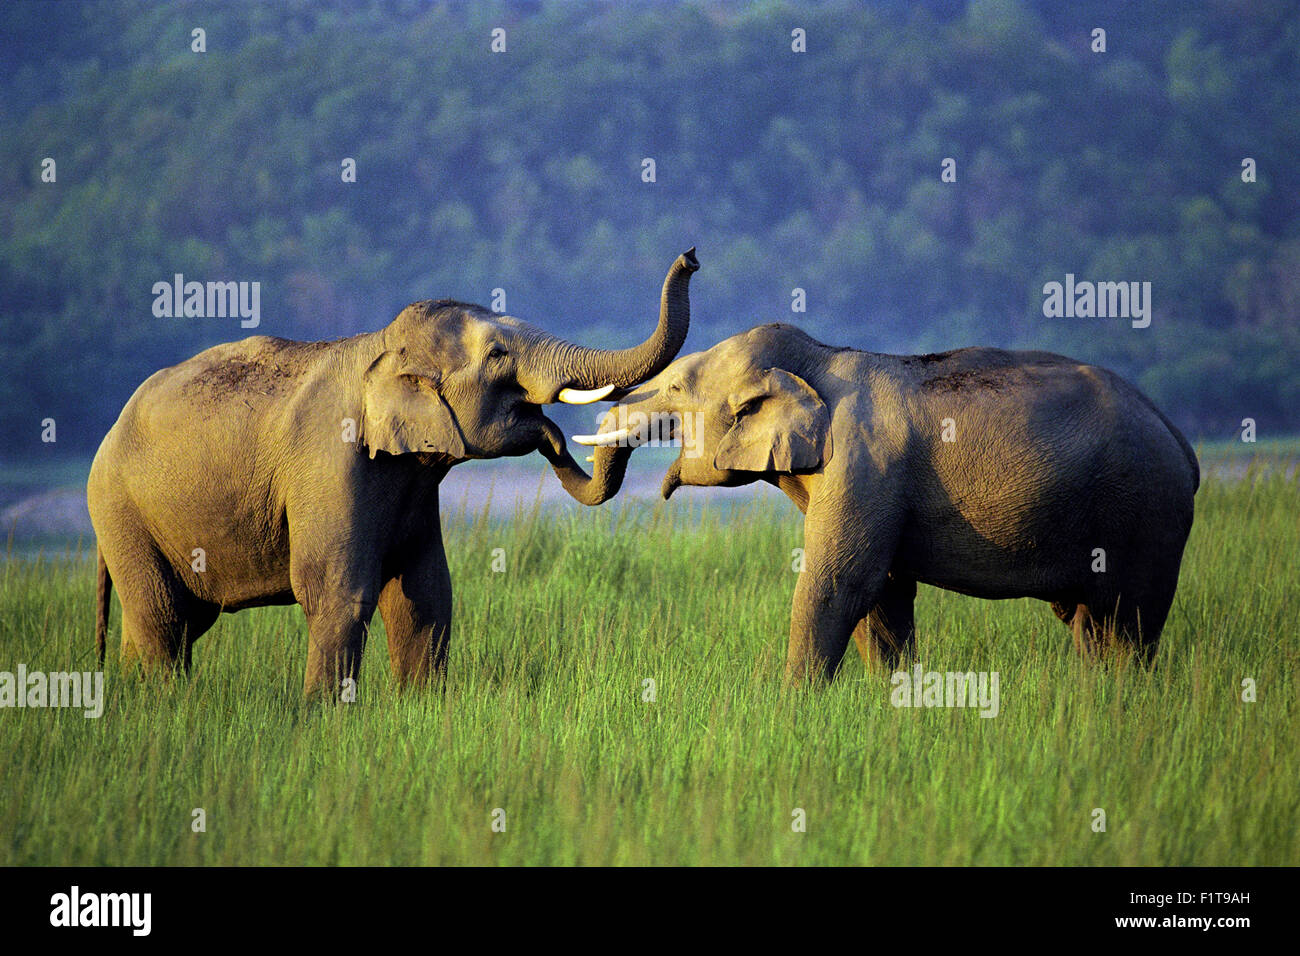 The image was shot in Corbett national park India Stock Photo